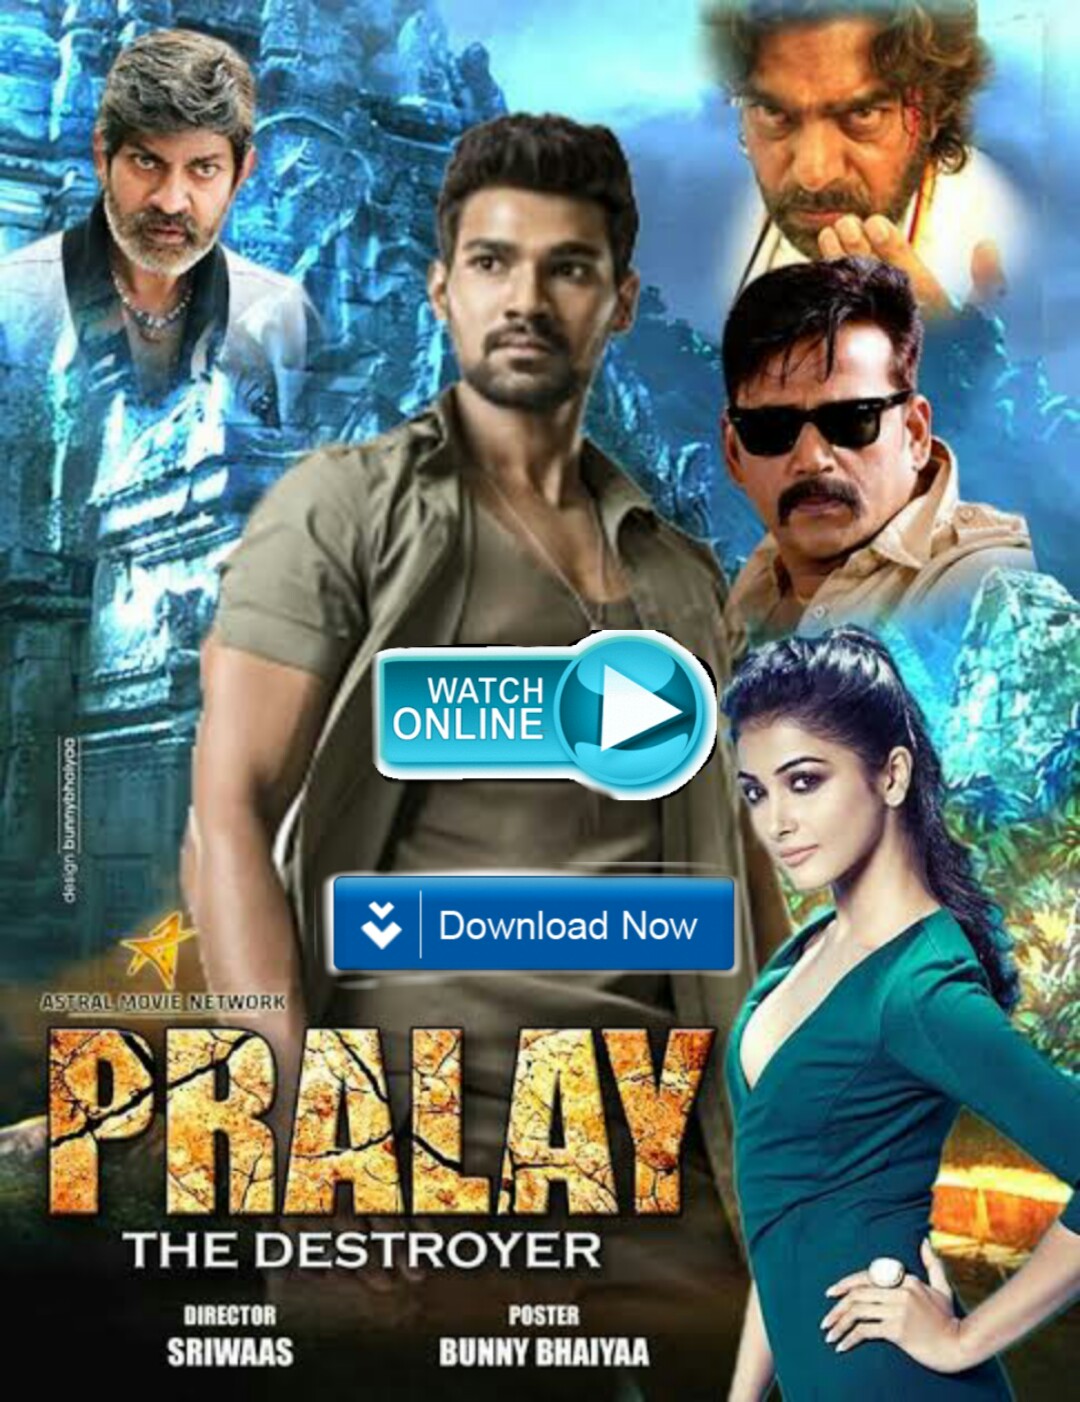 Pralay The Destroyer Hindi Dubbed Full Movie Download filmywap (filmyzilla)